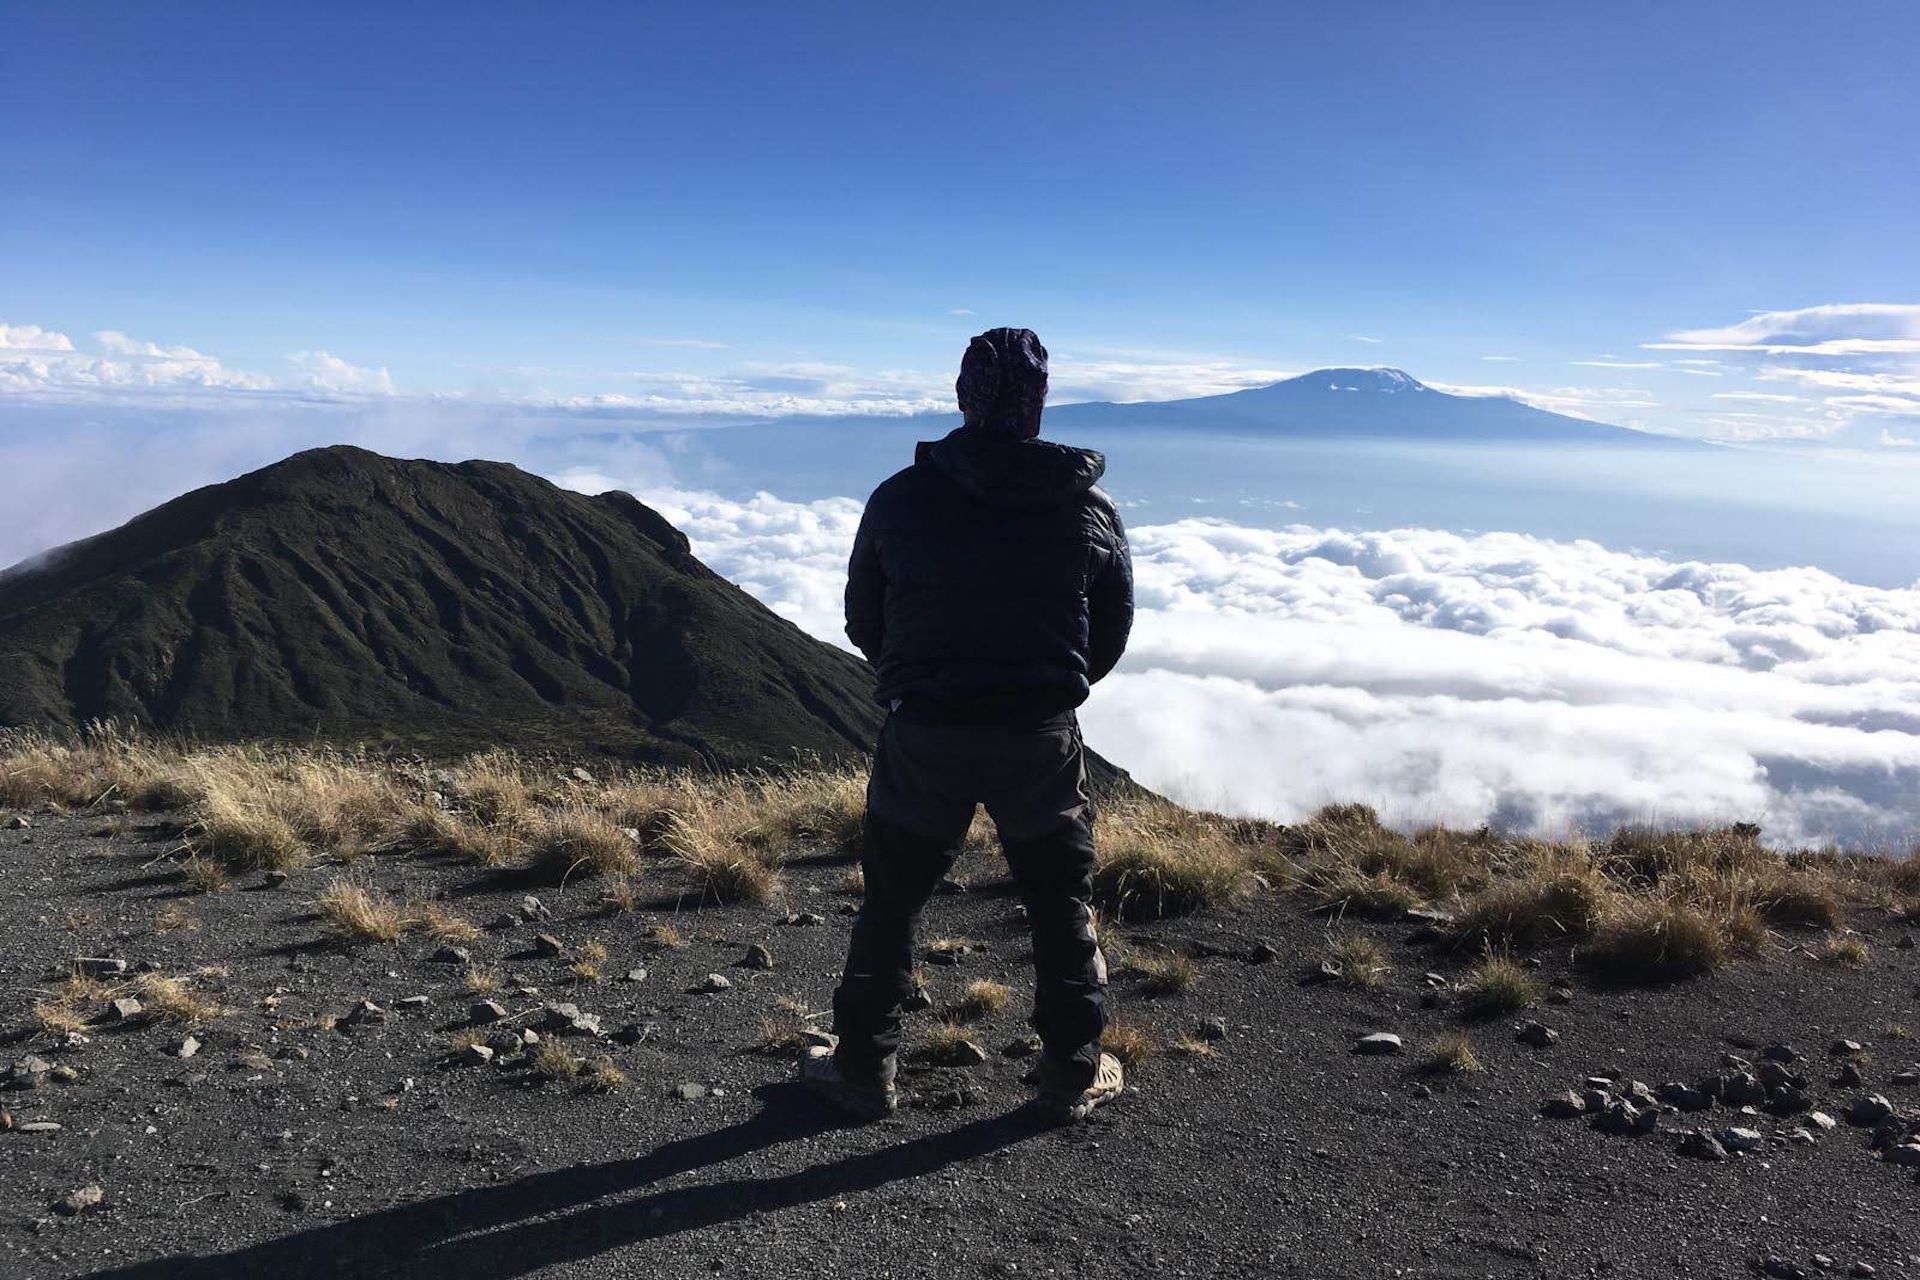 Views from Mount Meru with World Adventure Tours